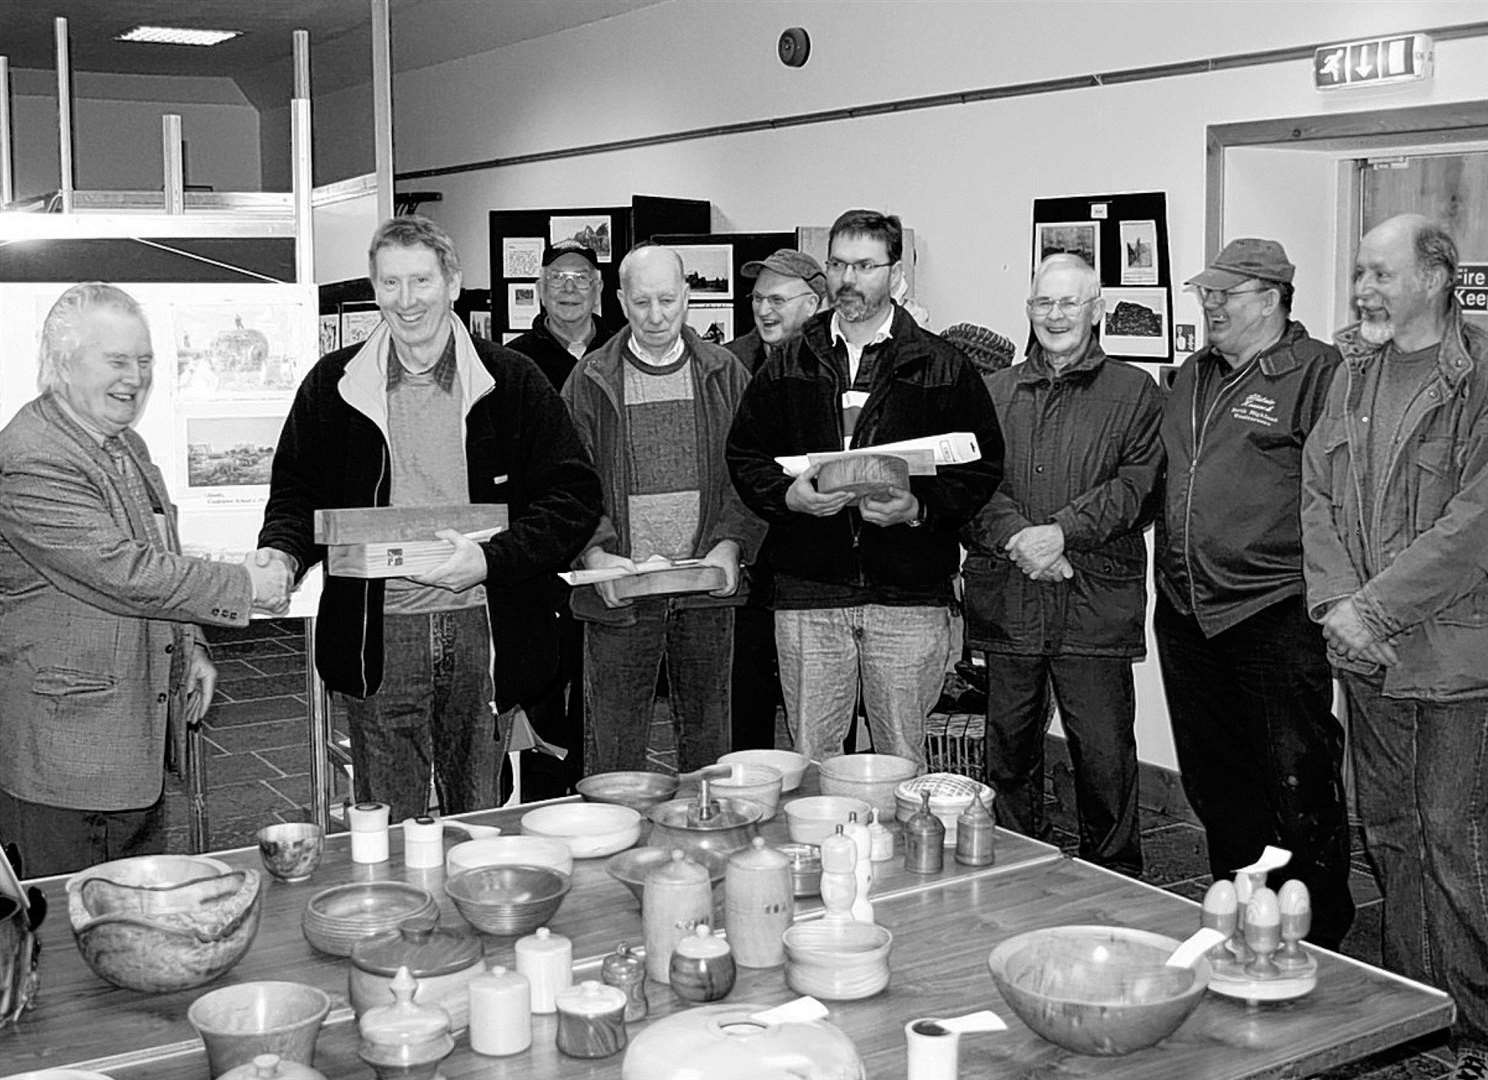 Prizes being presented at the North Highland Woodturners Association's annual woodturning competition, hosted by Castletown Heritage Society in early 2009.